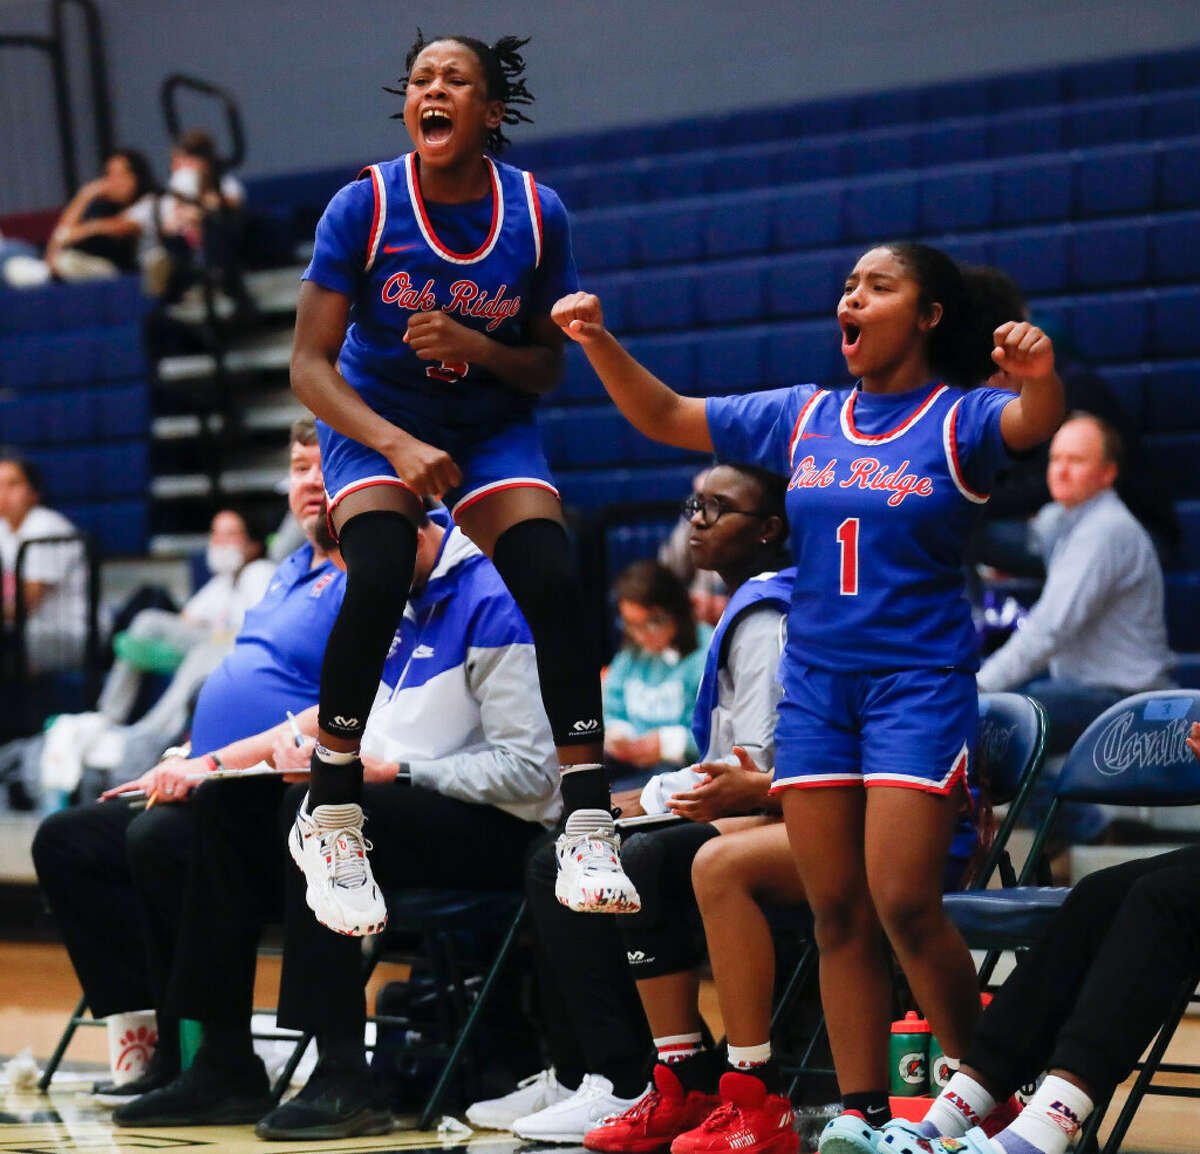 Oak Ridge small forward Chioma Emeh (3) cheers during a high school basketball game at College Park High School, Wednesday, Feb. 9, 2022, in The Woodlands.